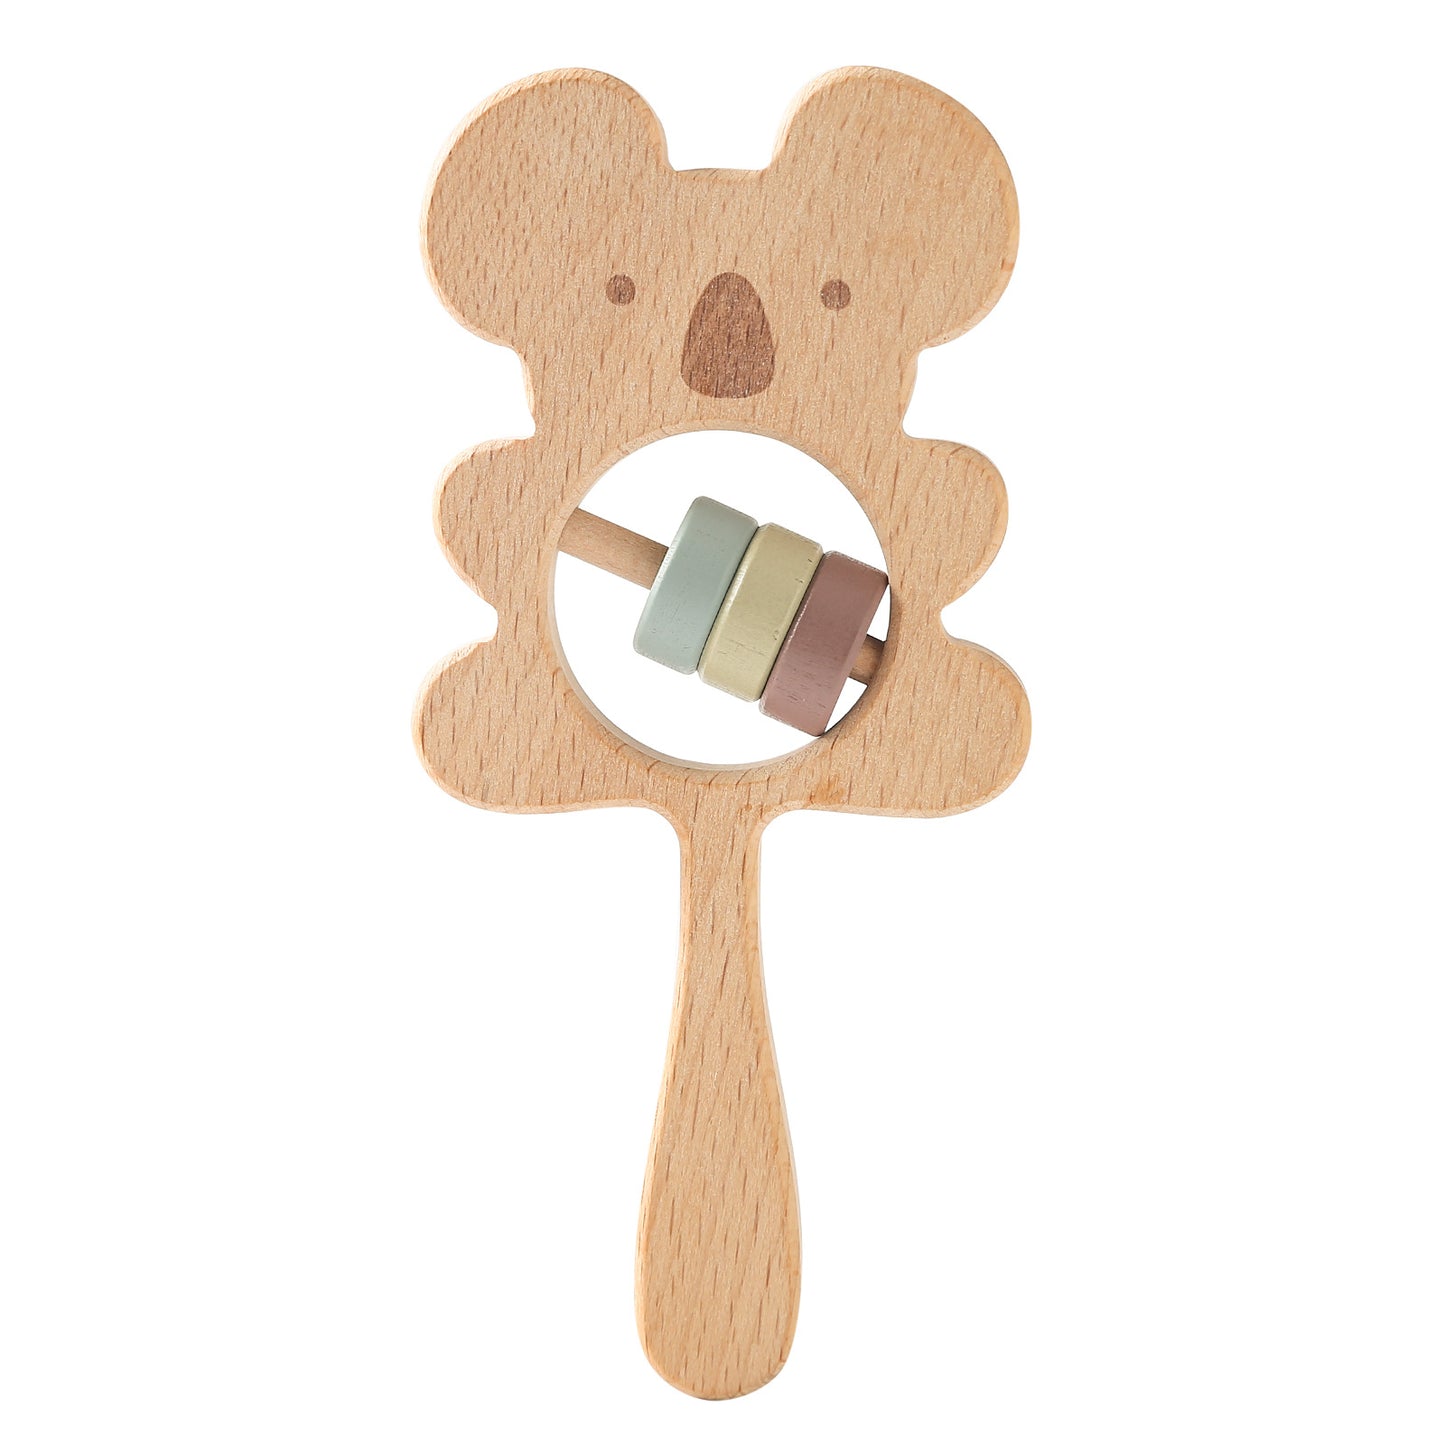 long handle natural wood koala rattle with pastel color rings in center as rattles